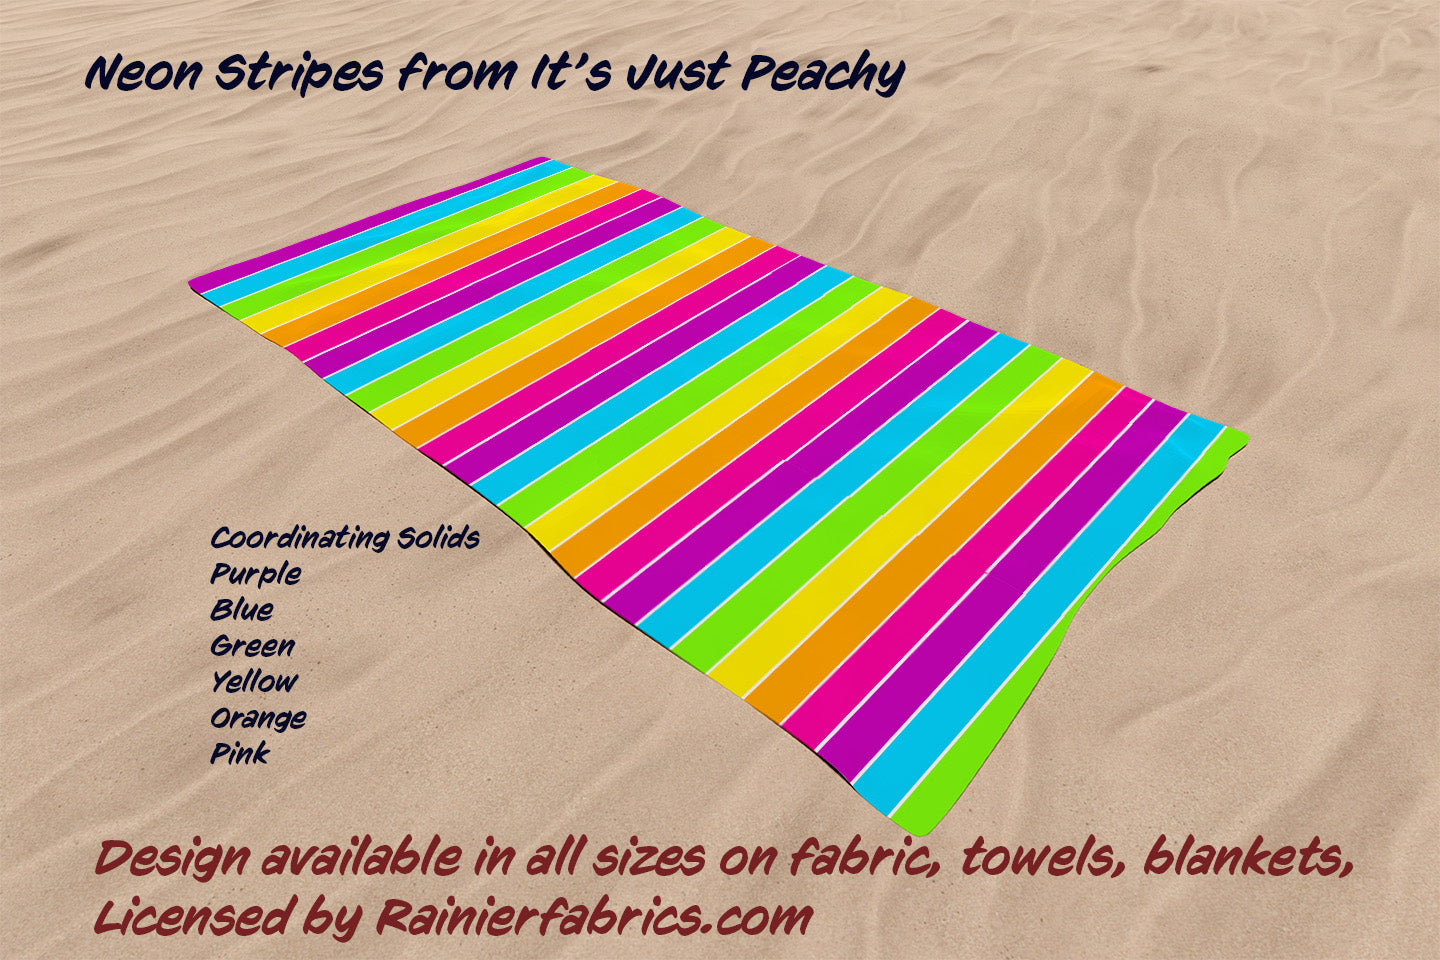 Neon Stripes from It's Just Peachy Designs - 2-5 day turnaround - Order by 1/2 yard; Description of bases below